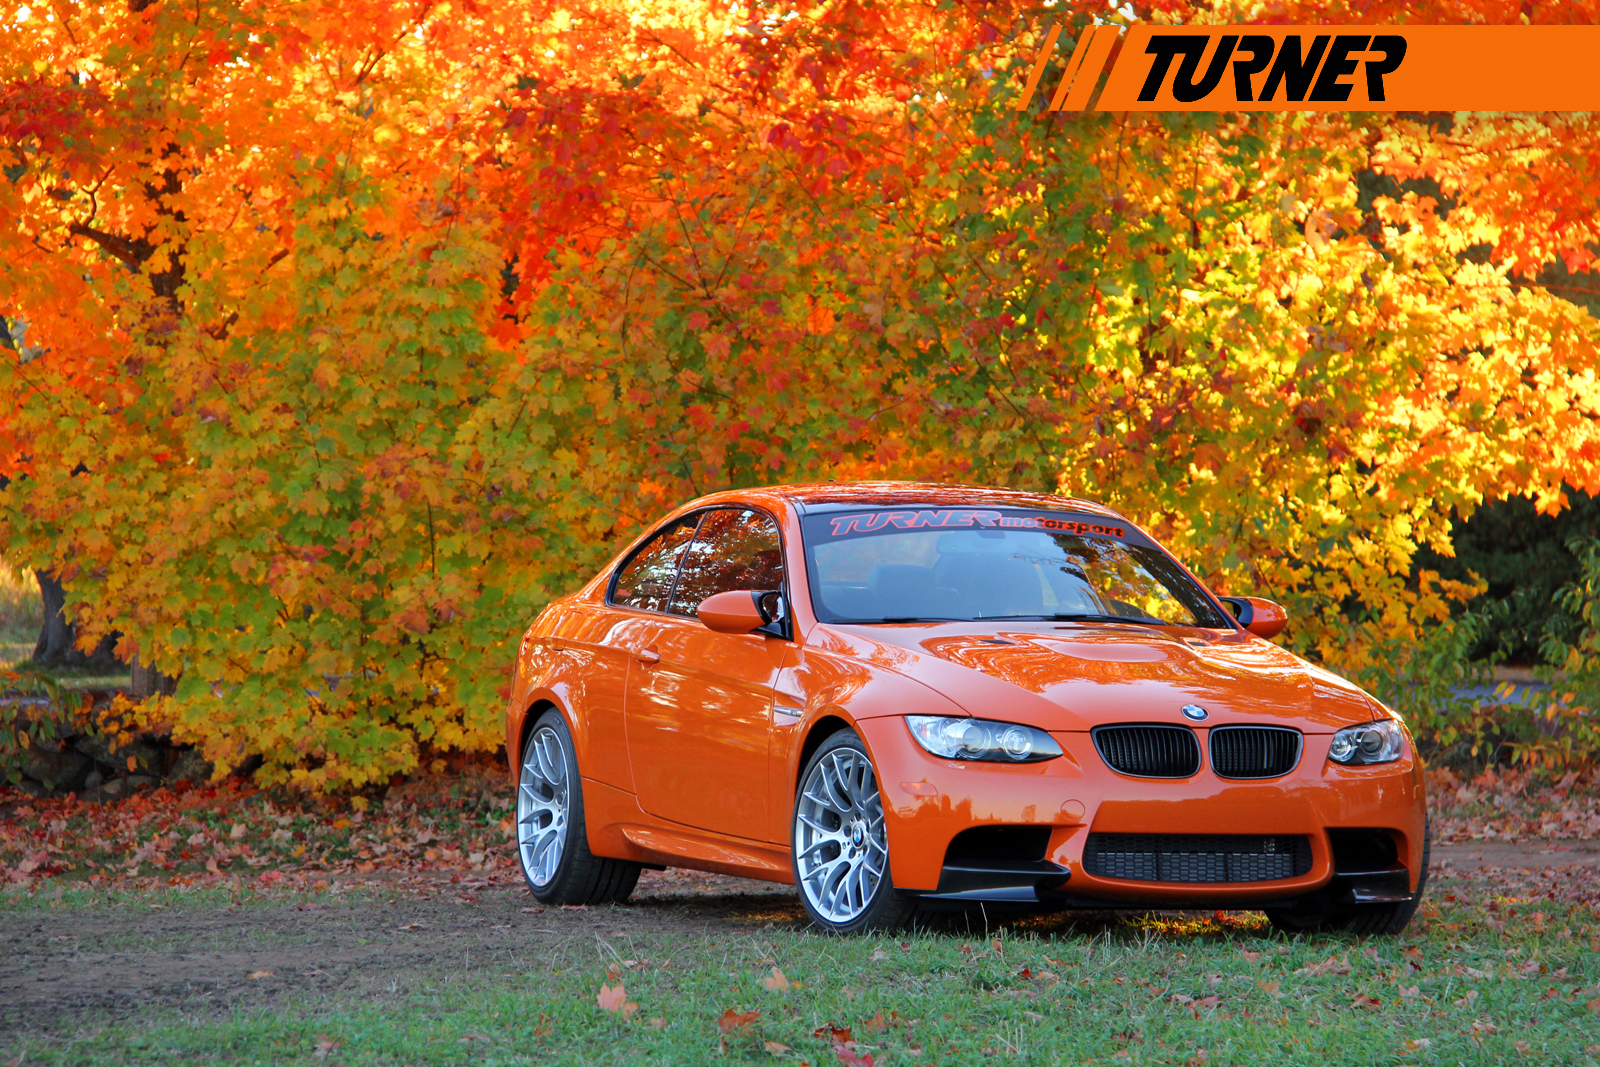 Turner Lime Rock Edition M3 Project Car - The Last V8 M3